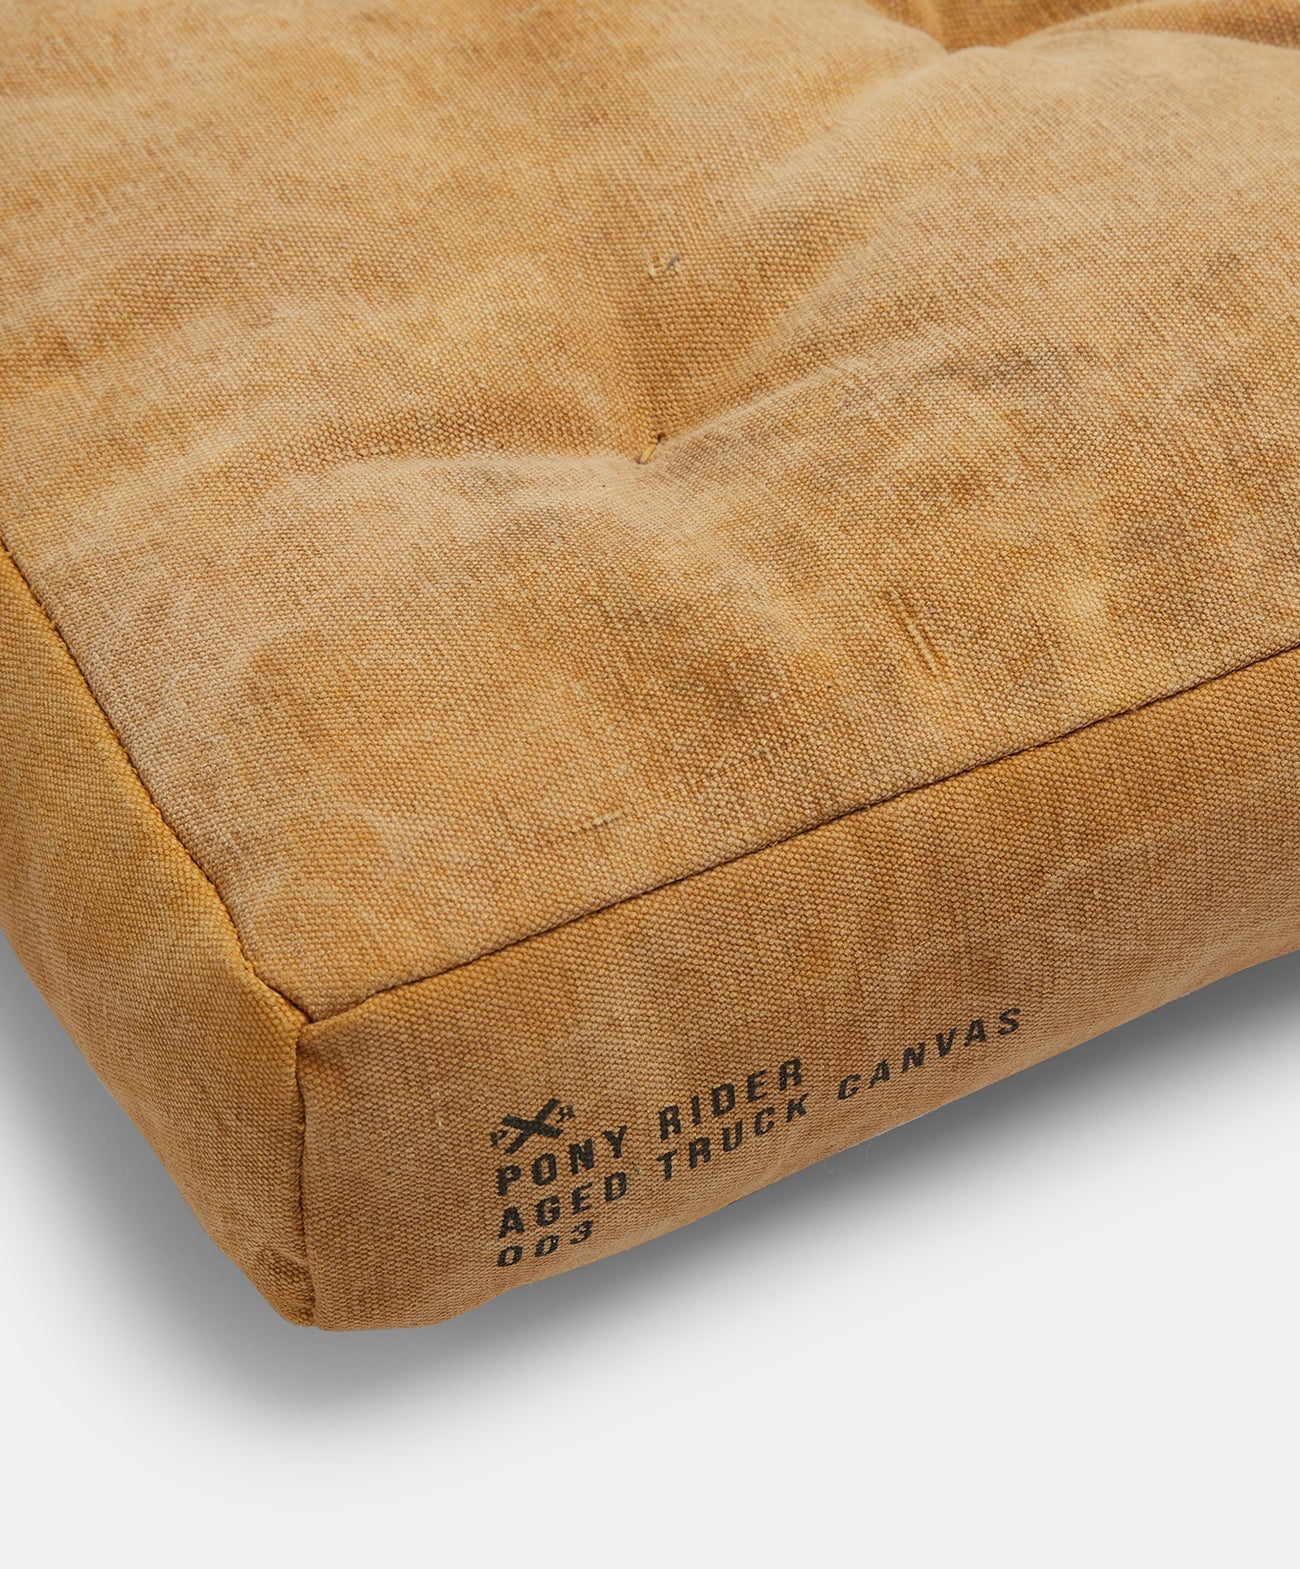 Camp Fire Outdoor Floor Cushion by Pony Rider